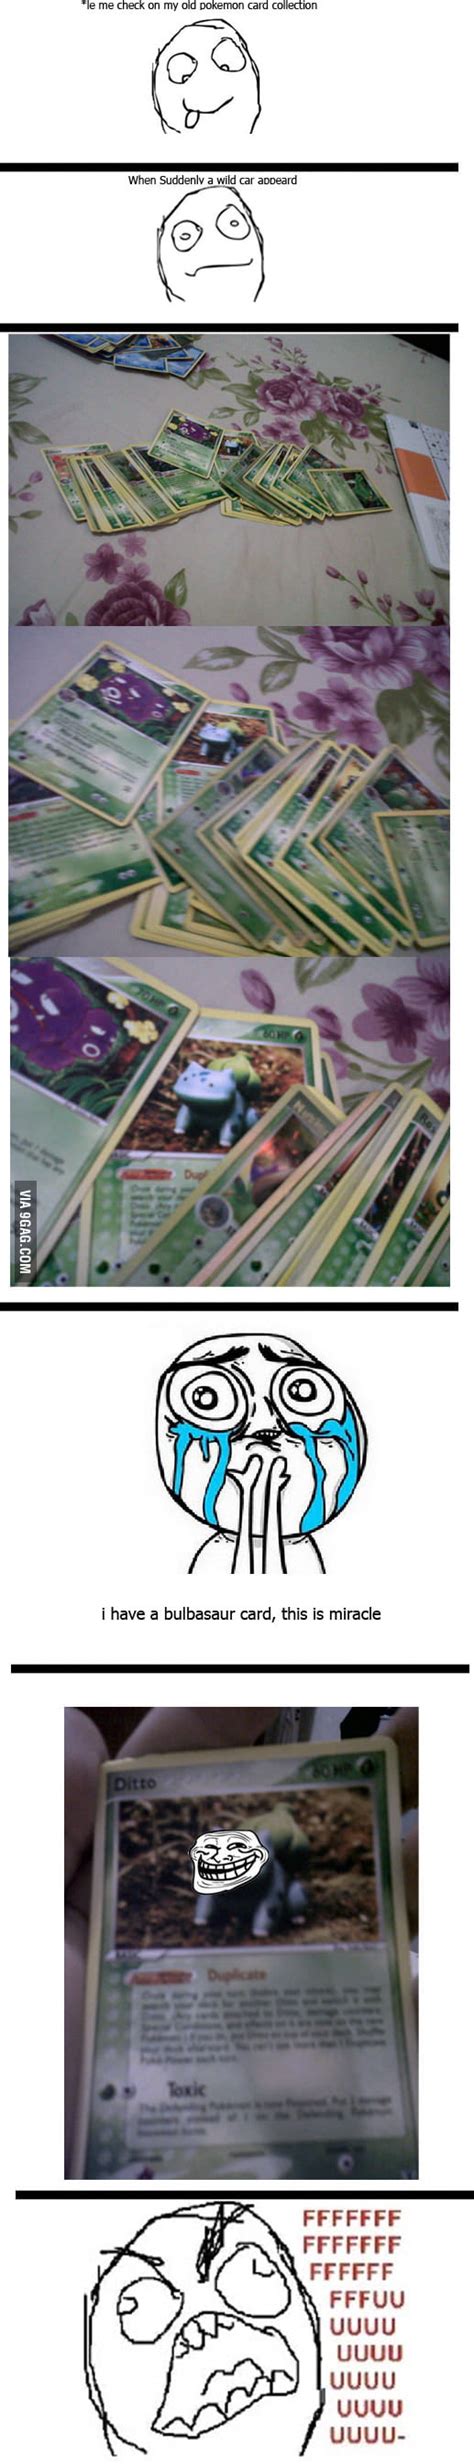 Just Ditto Card 9gag